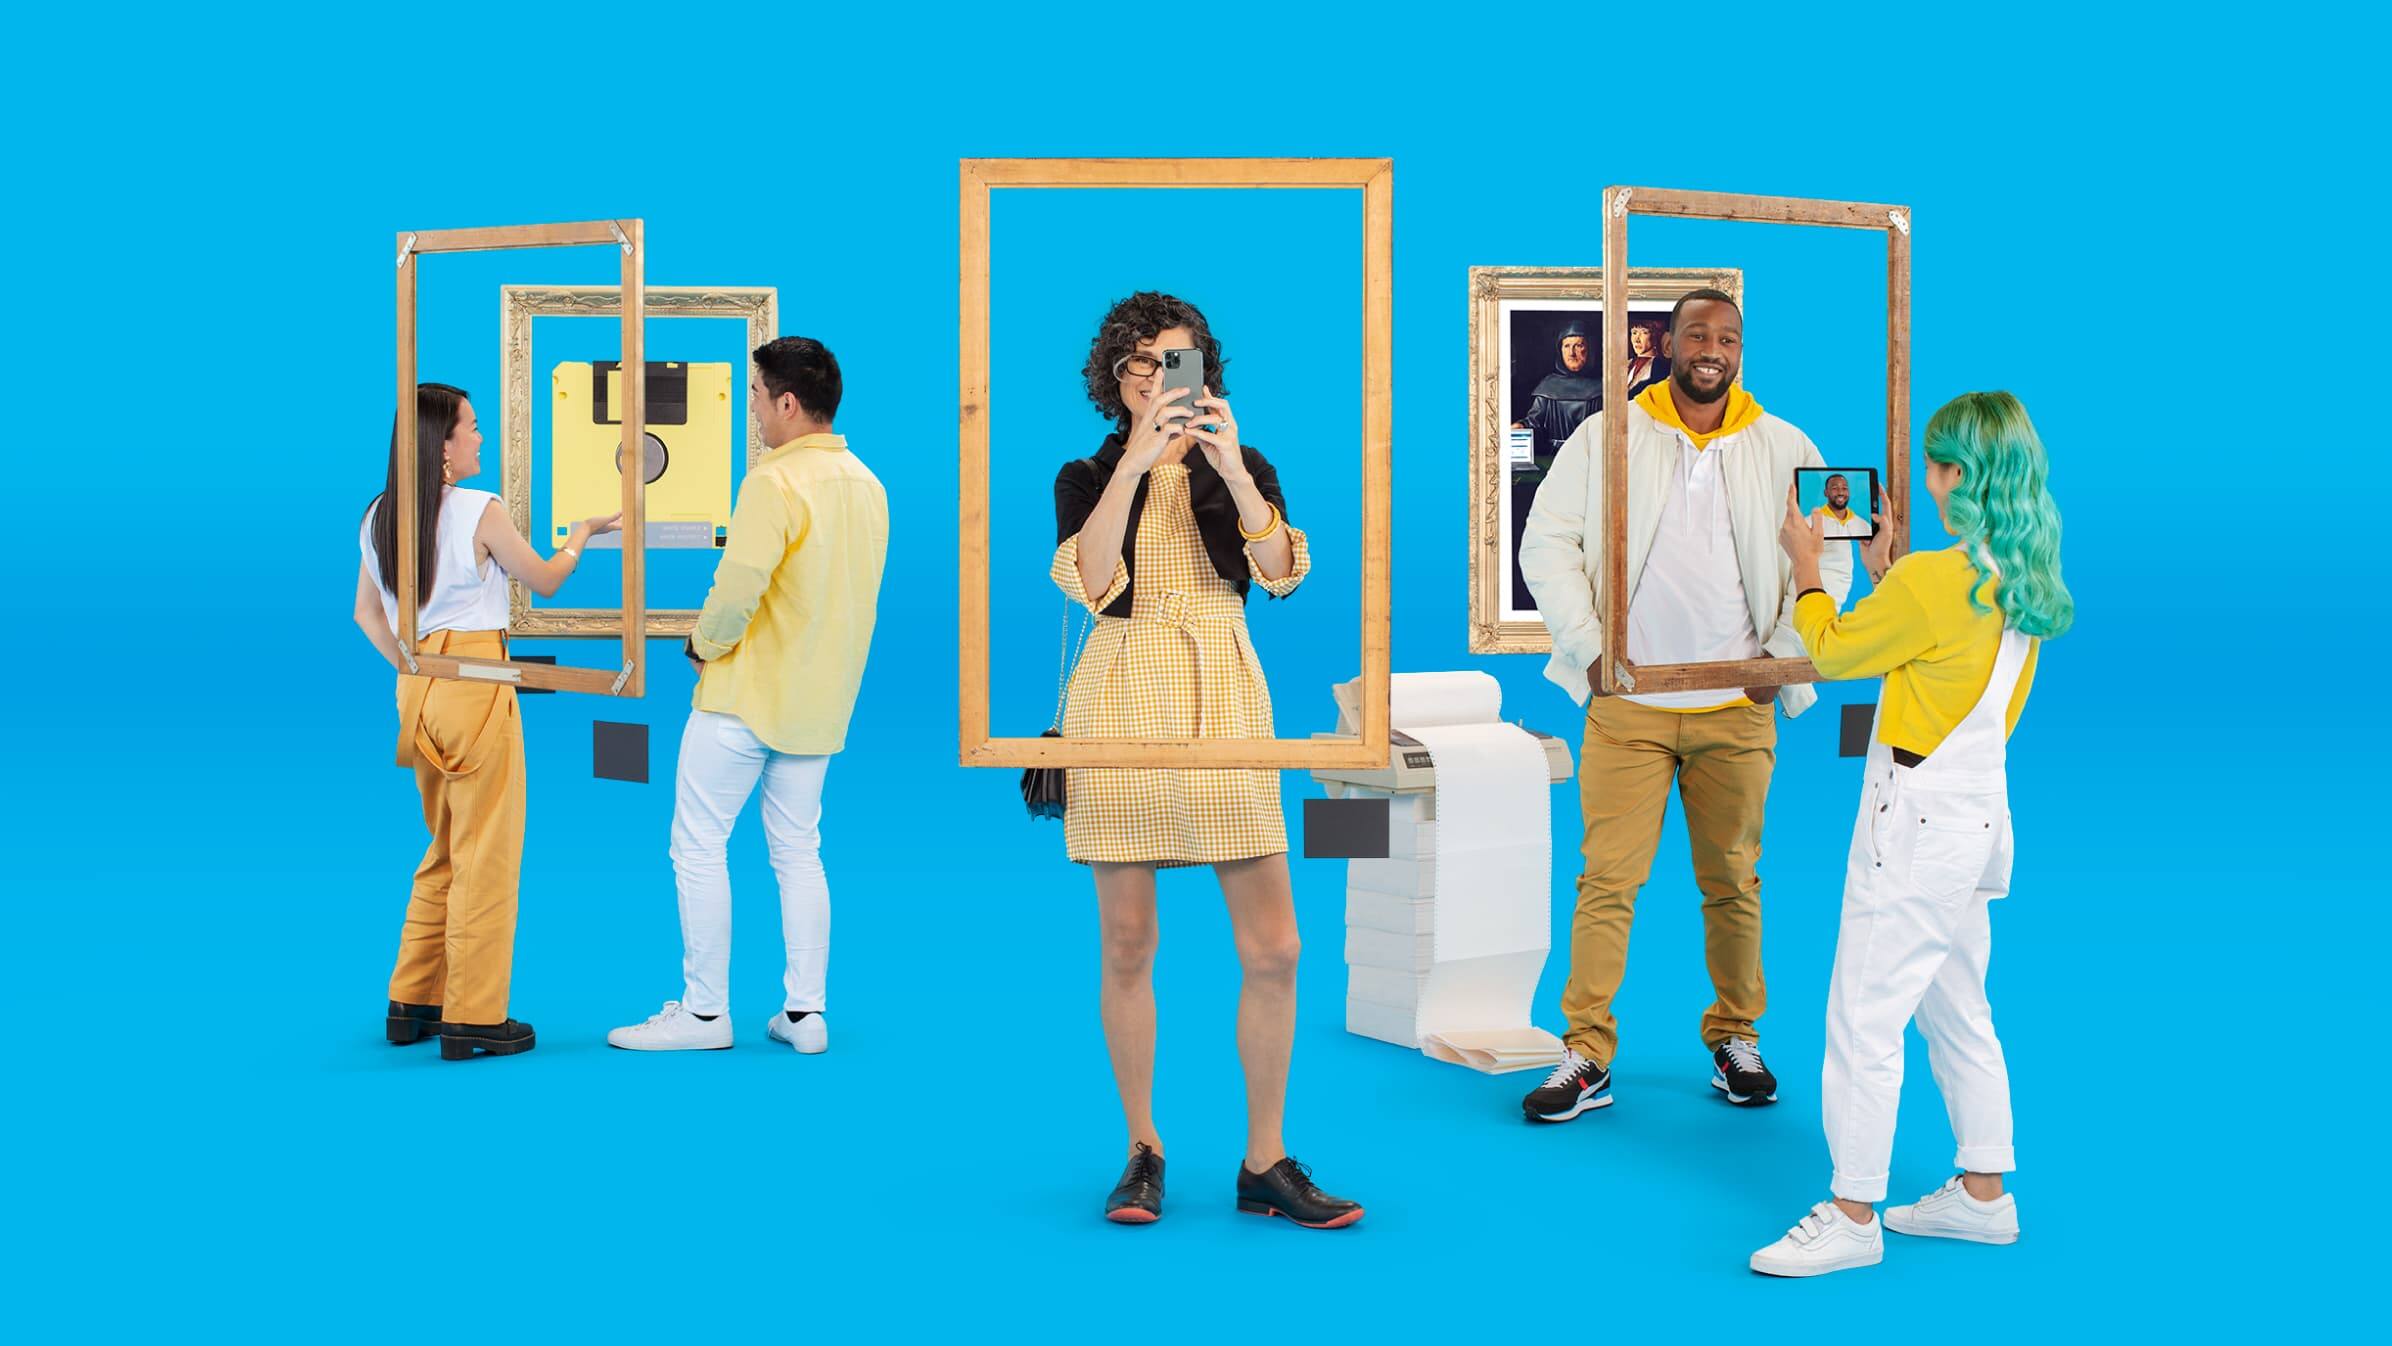 Five people against a blue background looking through floating picture frames at an old floppy disk and an old printer.